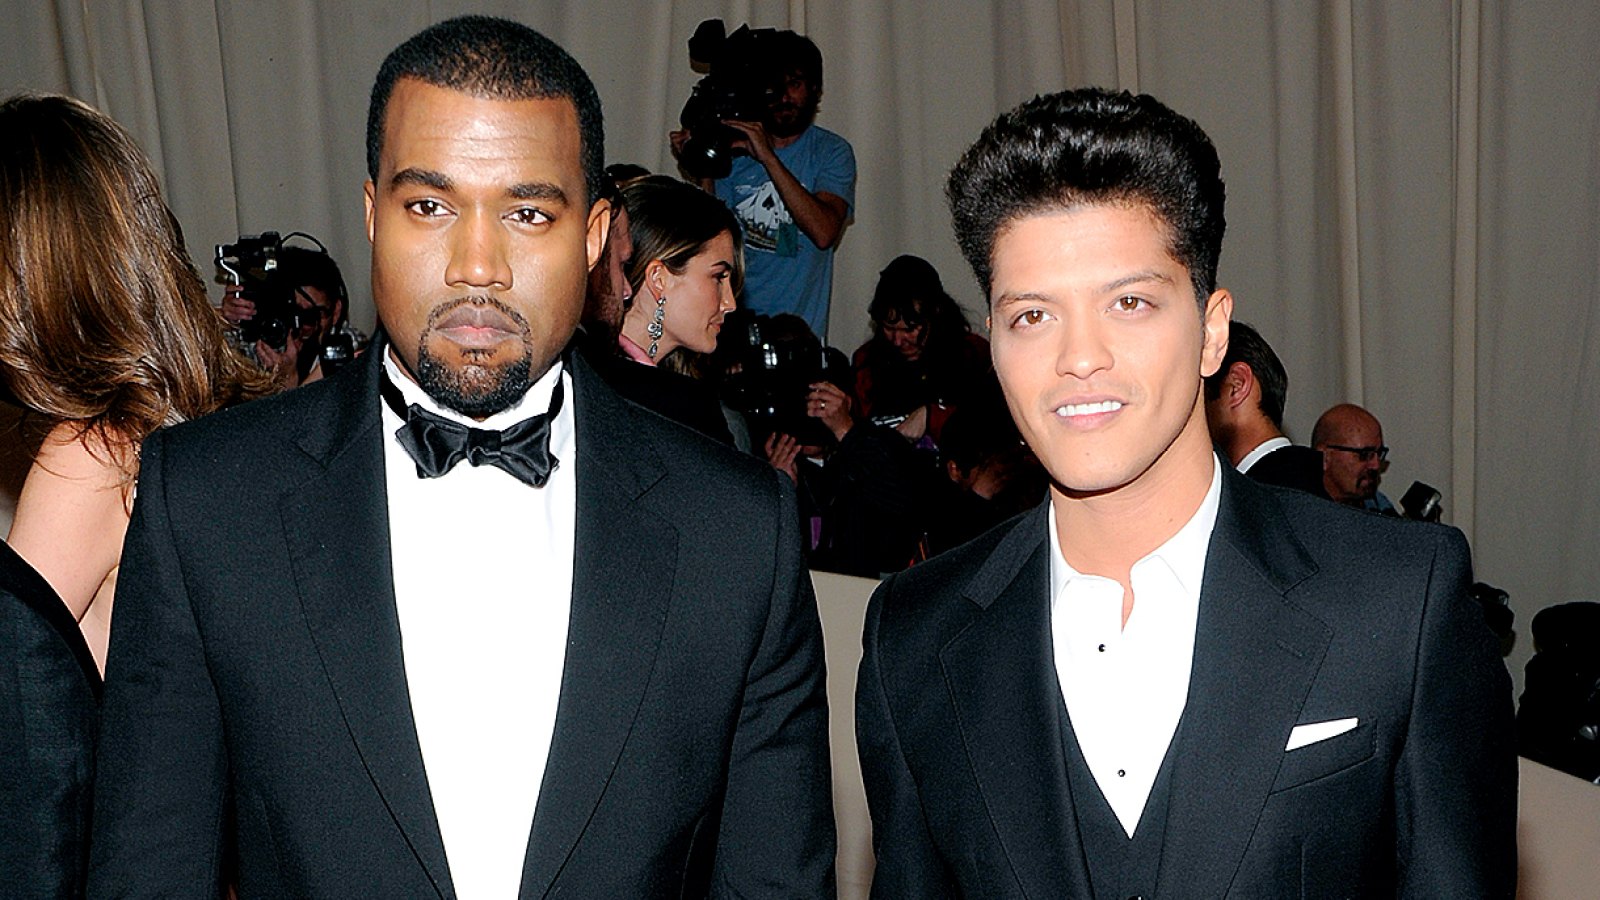 Kanye West, left, and Bruno Mars arrive at the Metropolitan Museum of Art Costume Institute gala benefit, celebrating the 'Alexander McQueen: Savage Beauty' exhibition, Monday, May 2, 2011 in New York.